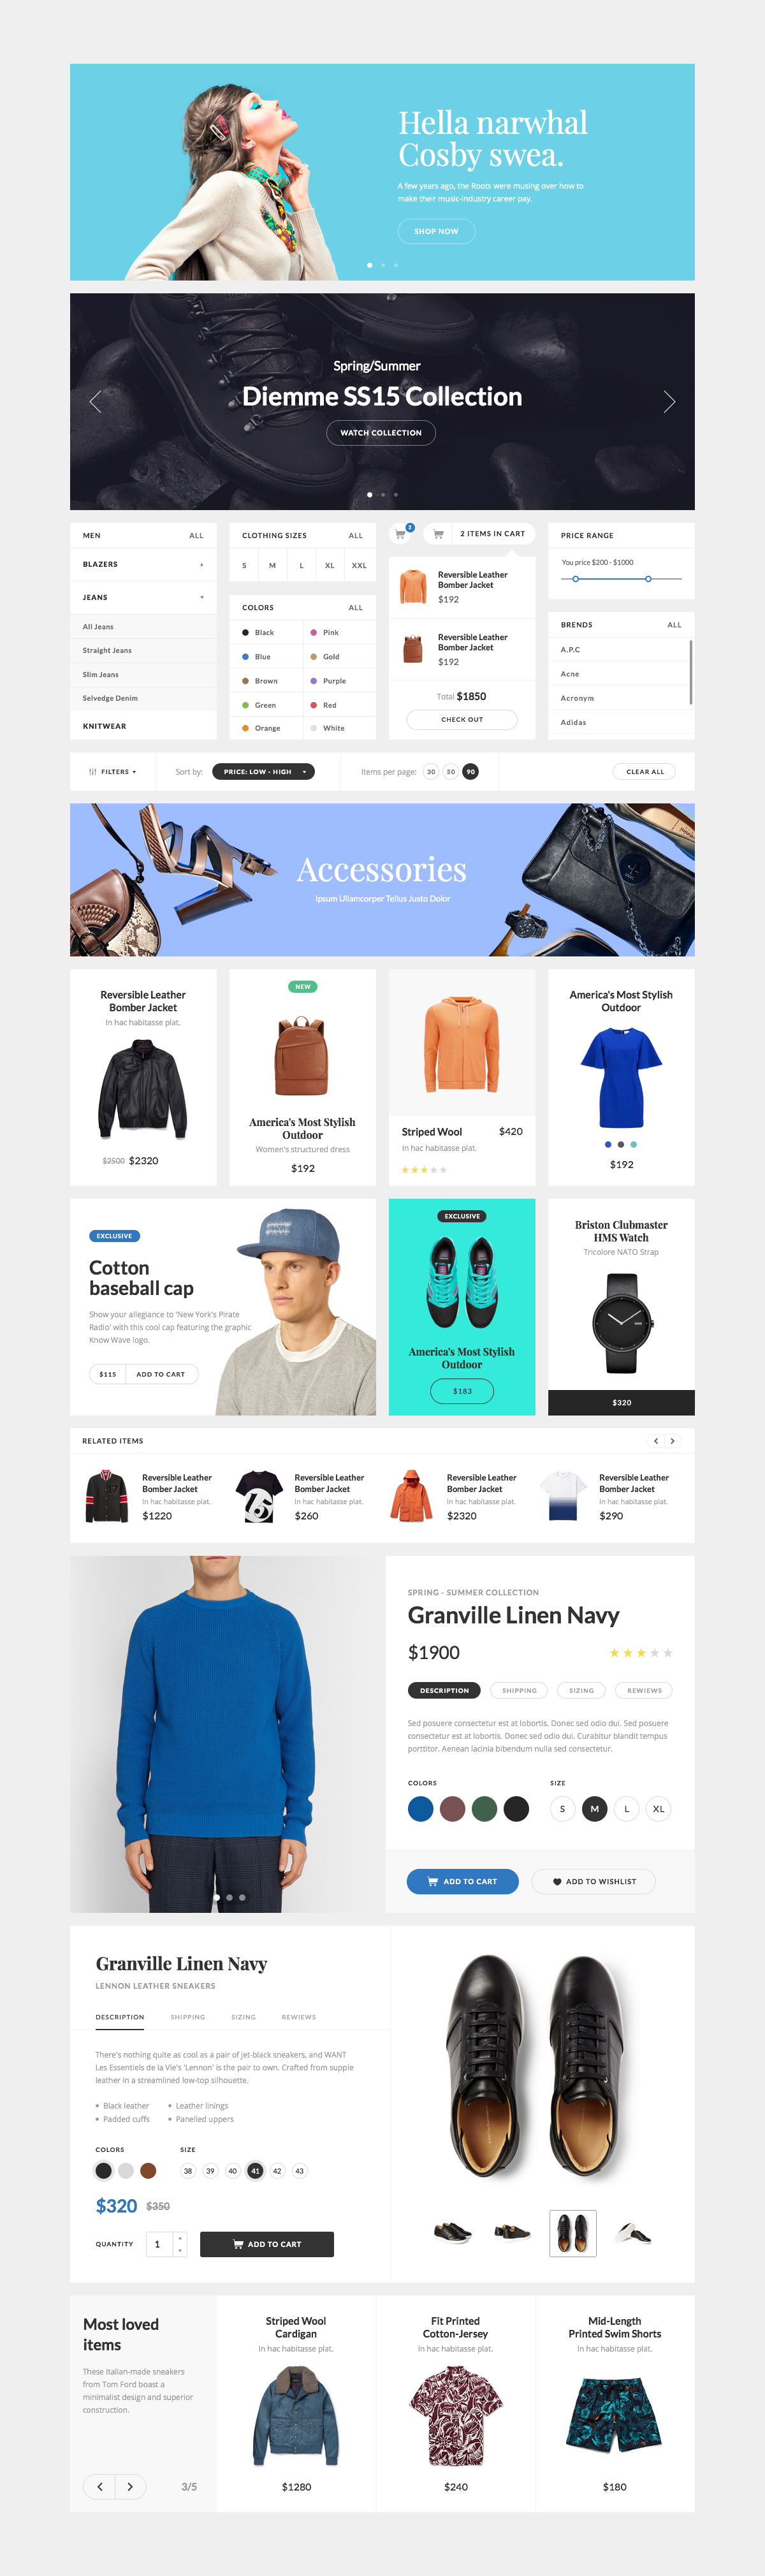 Product page - ecommerce design by Visual Hierarchy on Dribbble